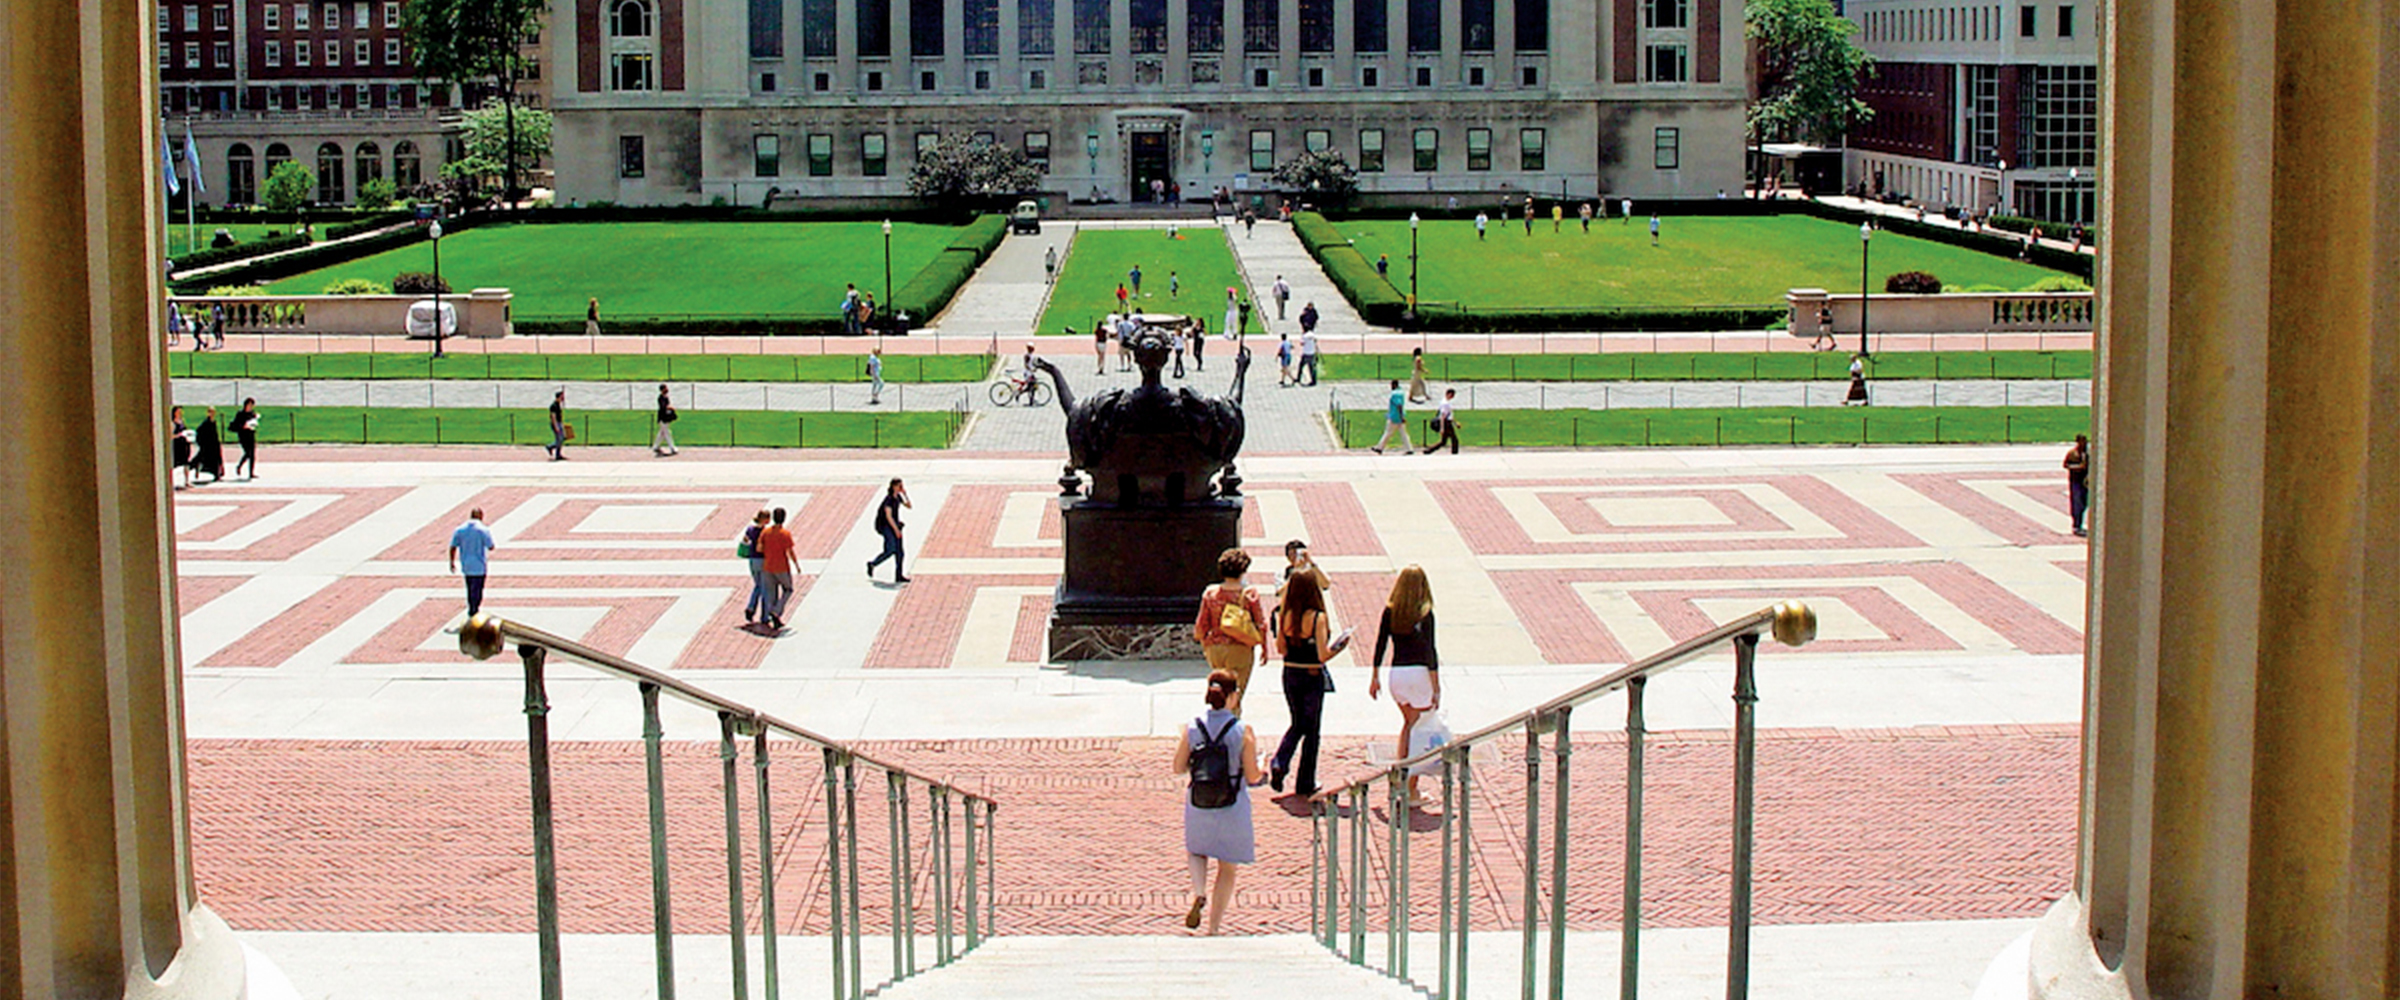 Columbia University Fully Funded Scholarships 2024 in USA for Displaced  Students